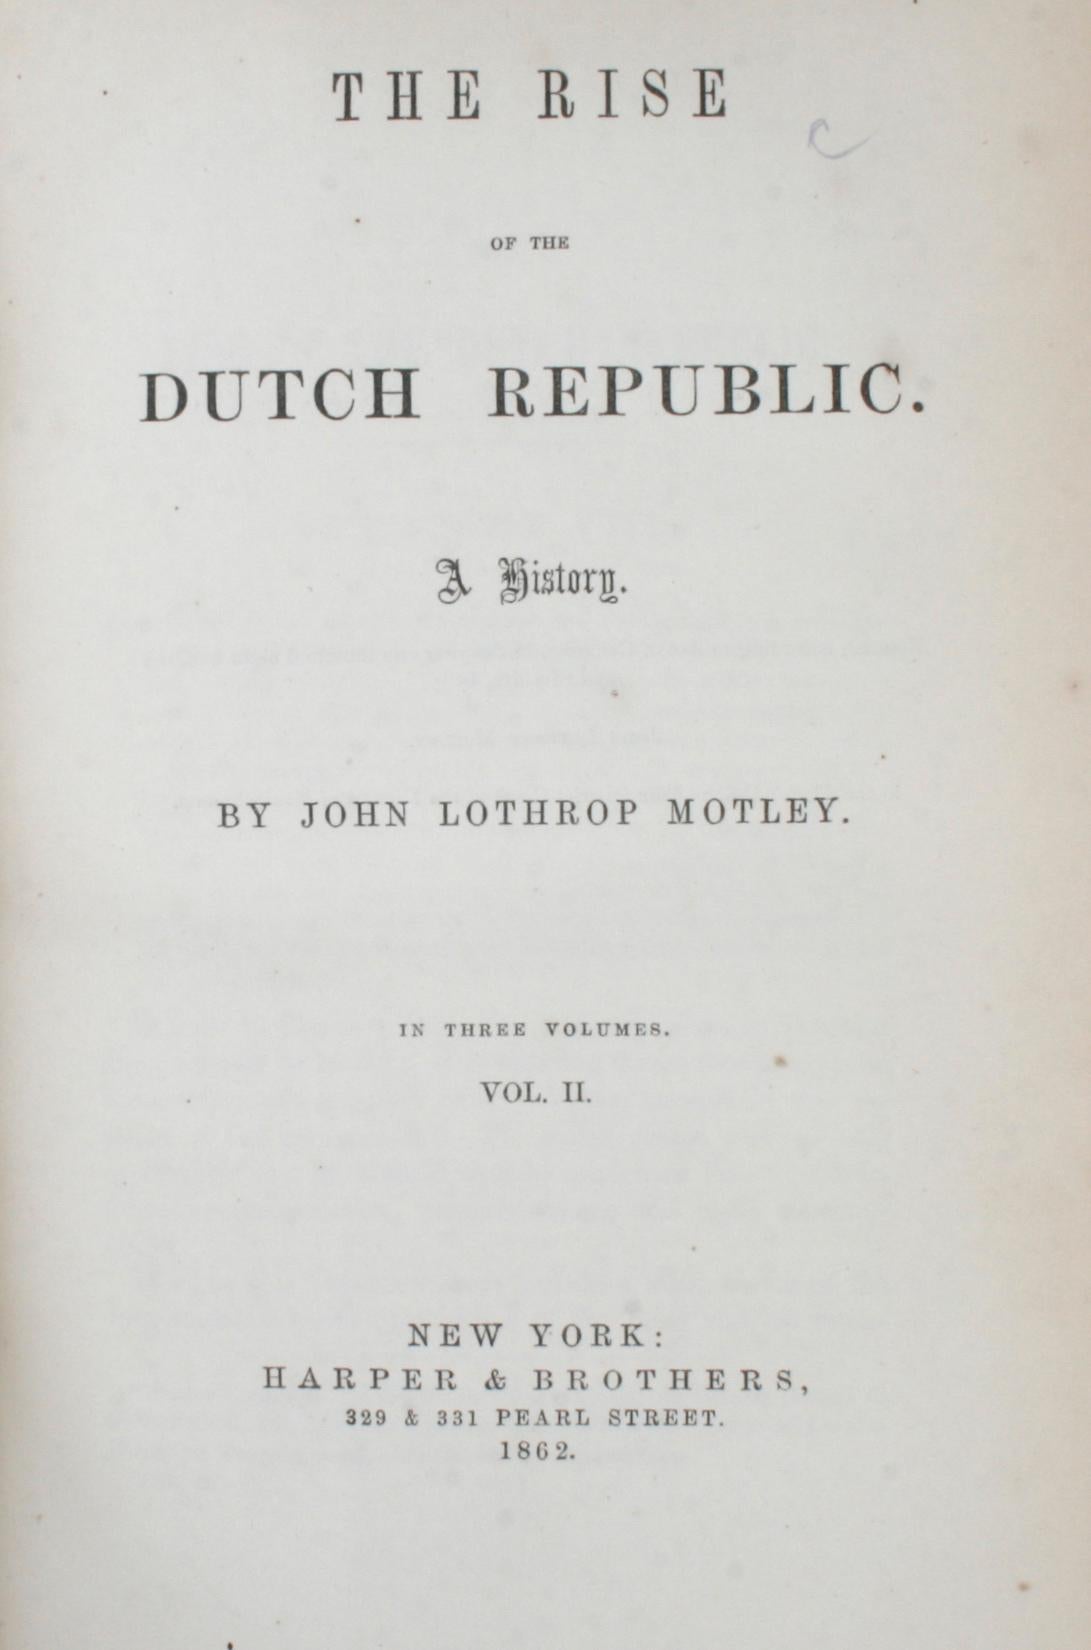 7 Volume Leather Bound Set, Dutch Republic and United Netherlands, First Edition 1